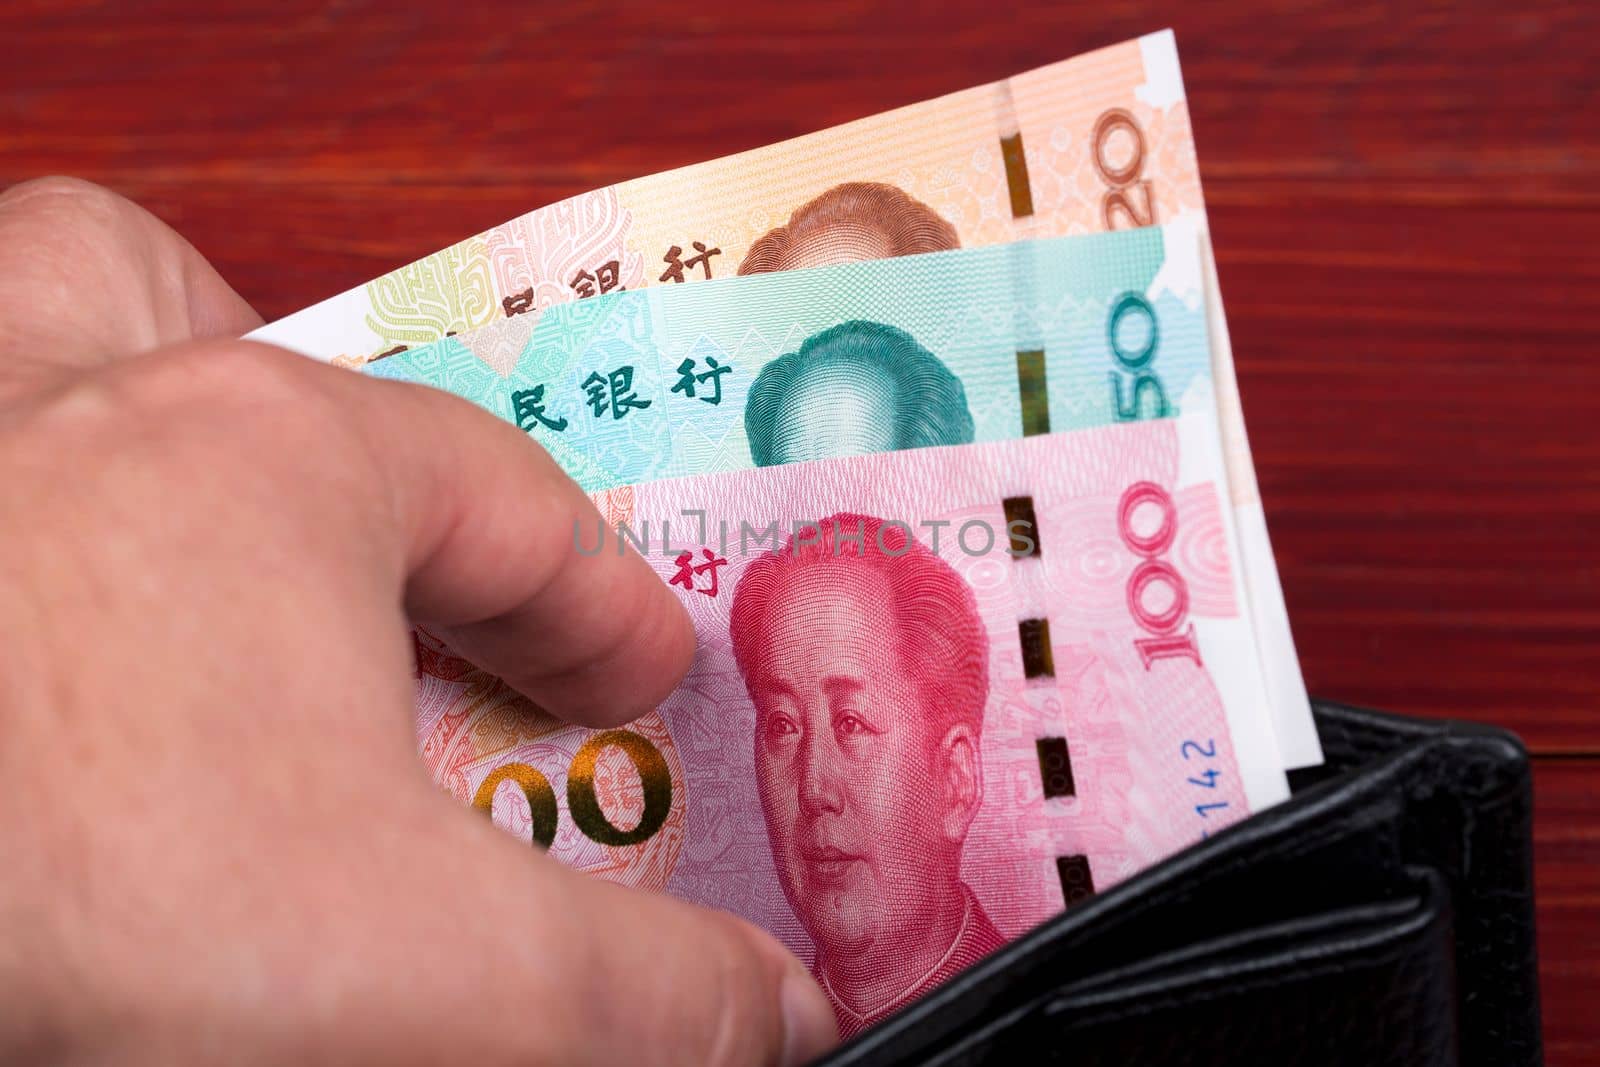 Chinese money in the black wallet